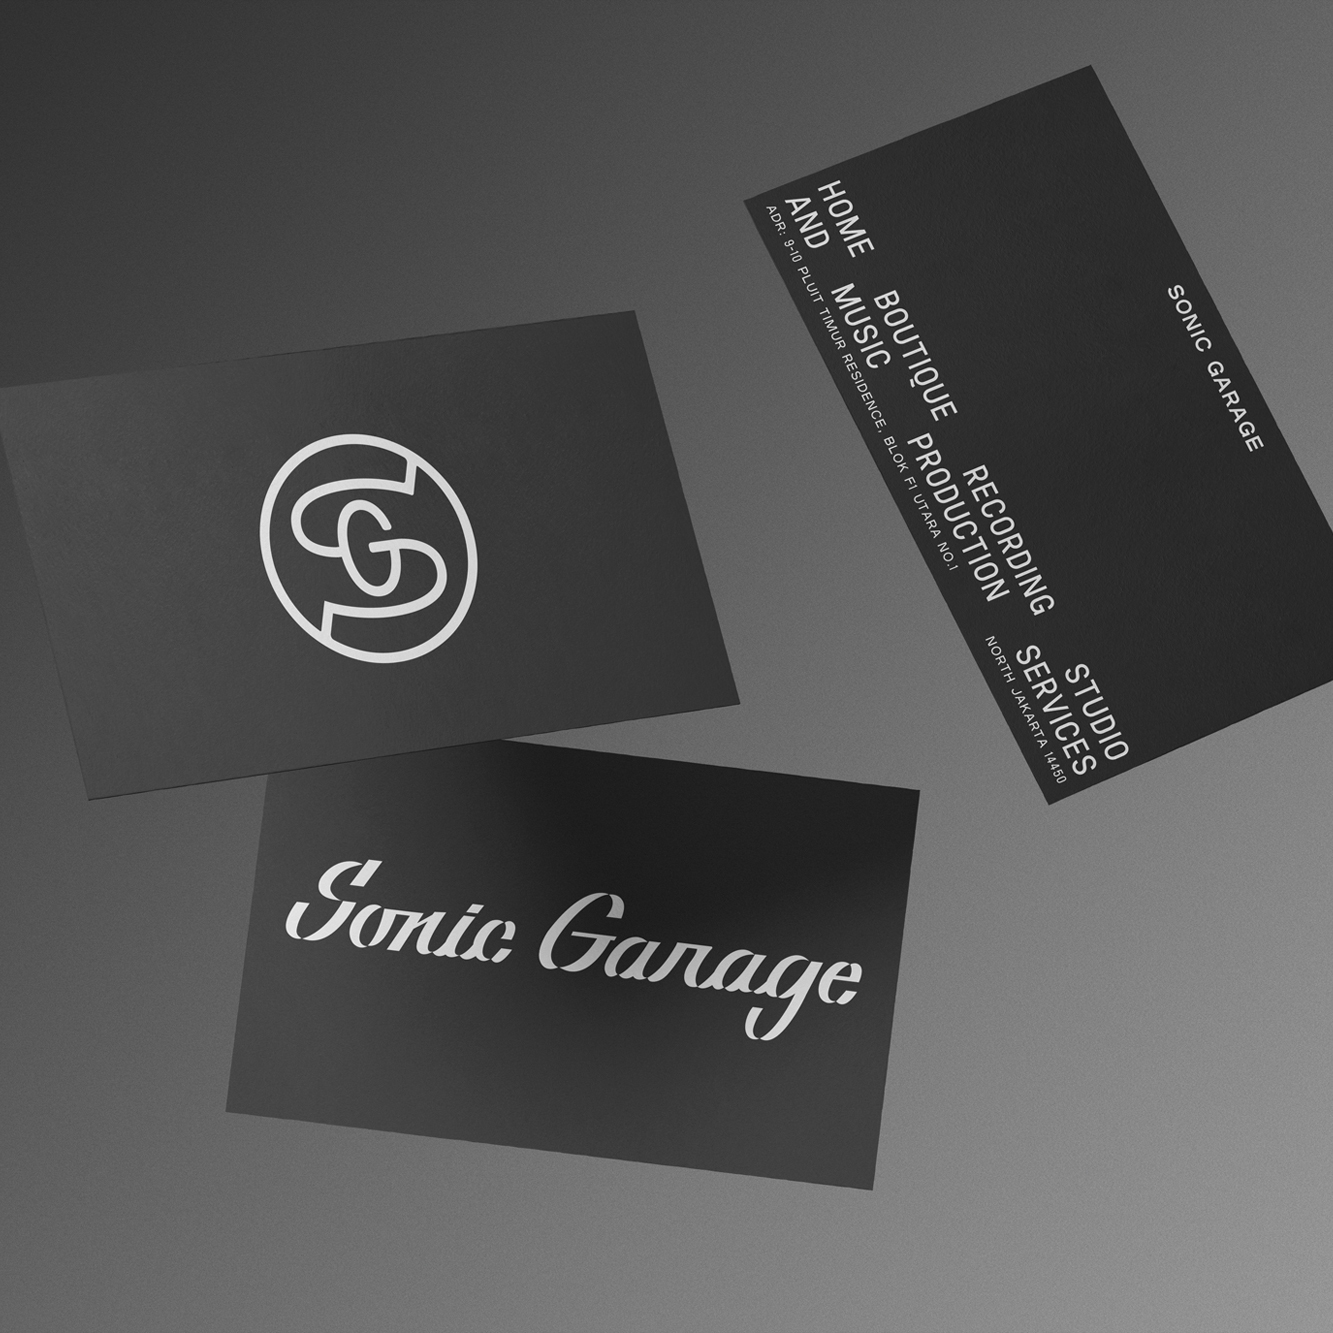 sonic-garage-5-business-card-square